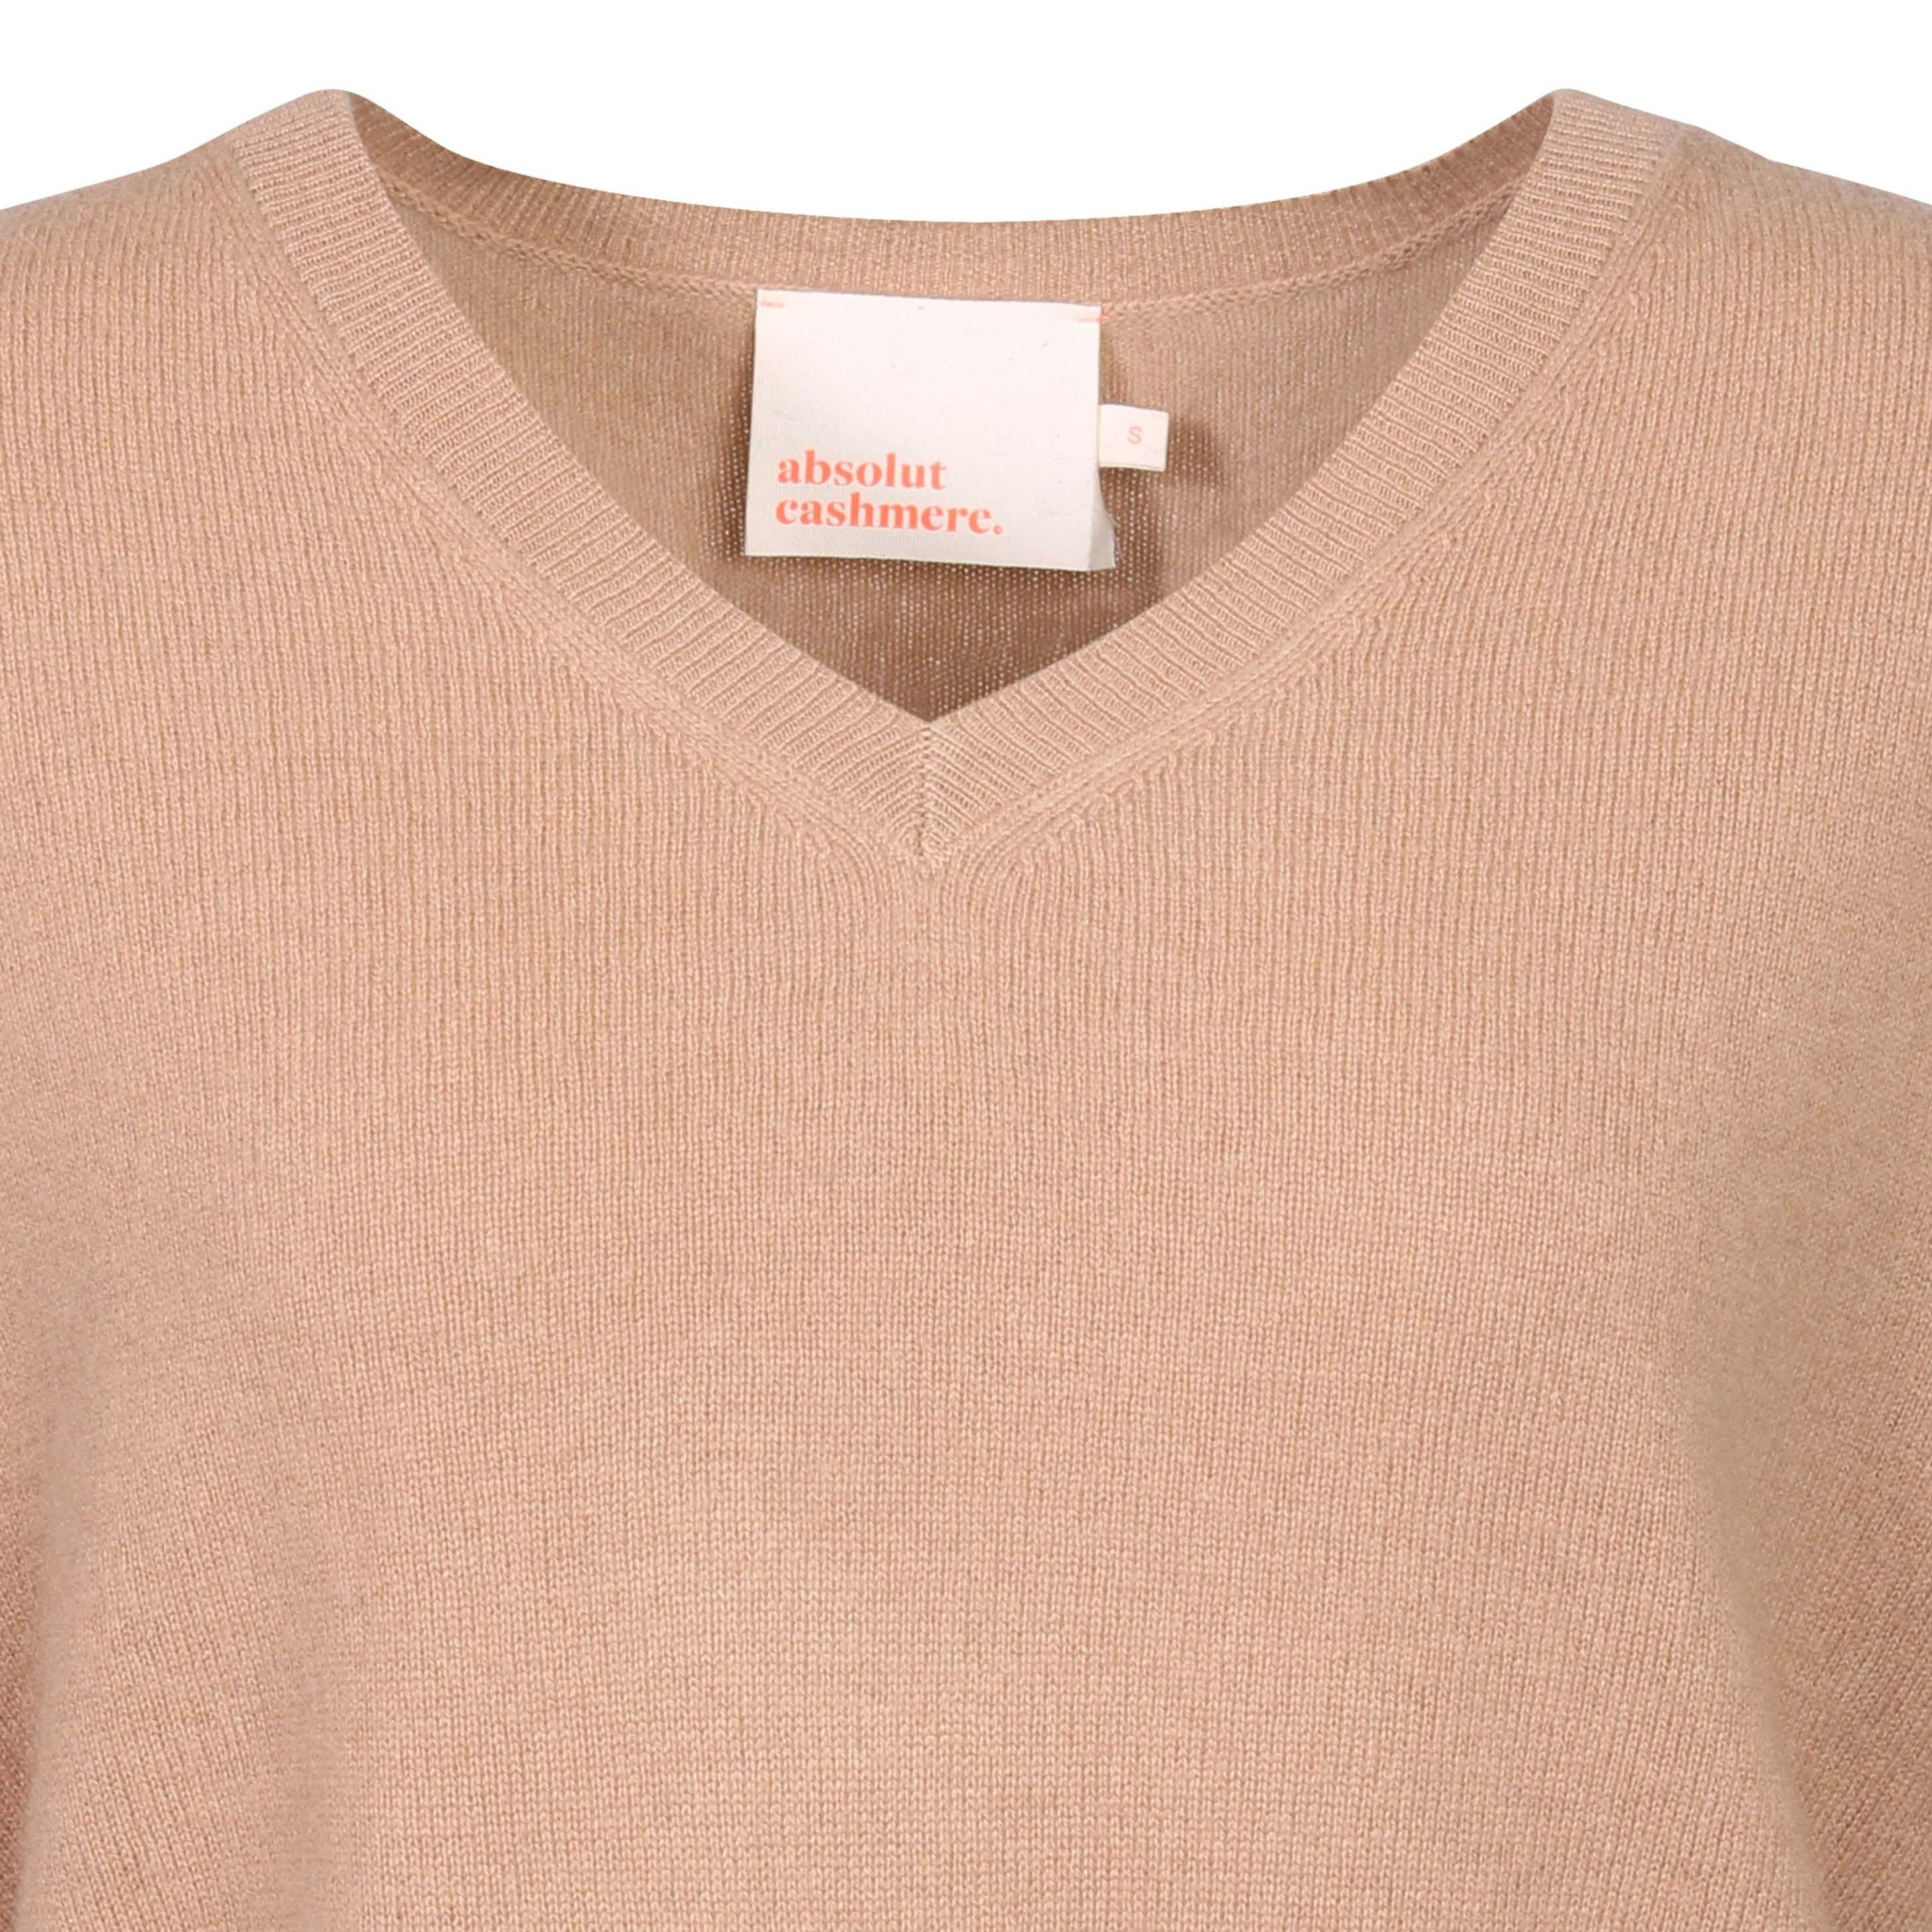 Absolut Cashmere Alicia Pullover in Camel S